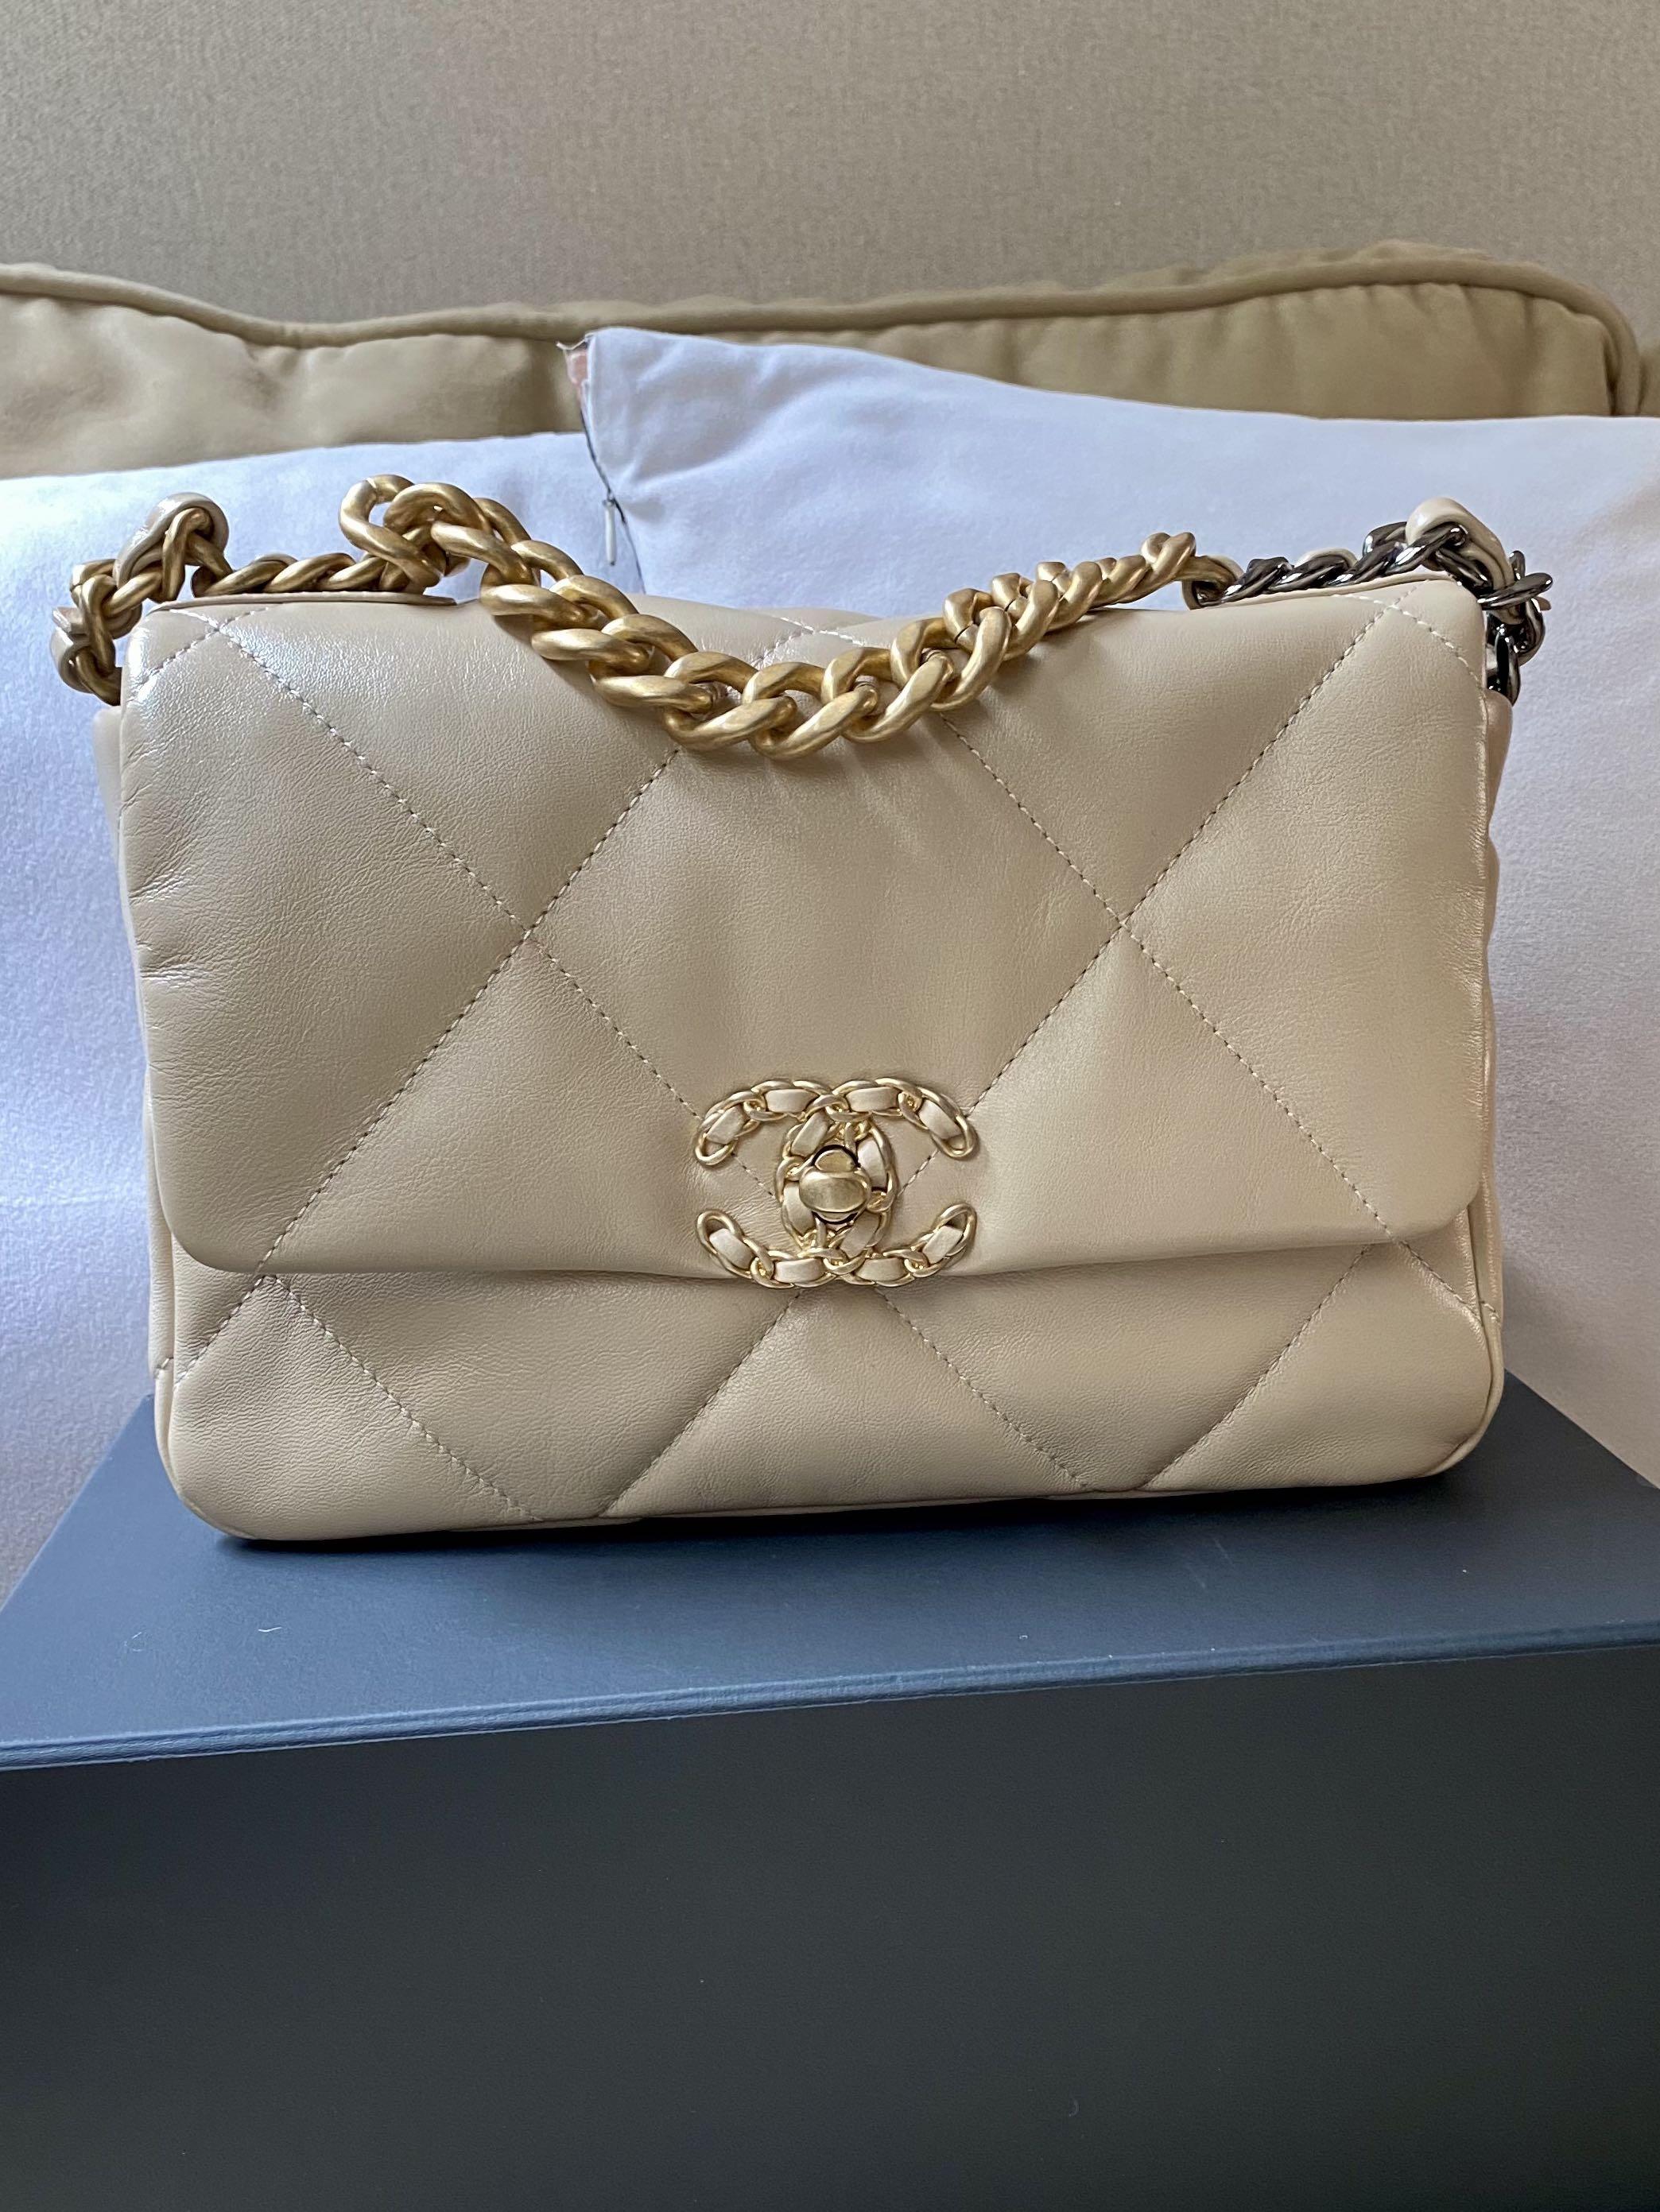 Chanel 19 Flap Bag In Pastel Yellow Lambskin With Gold Hardware in